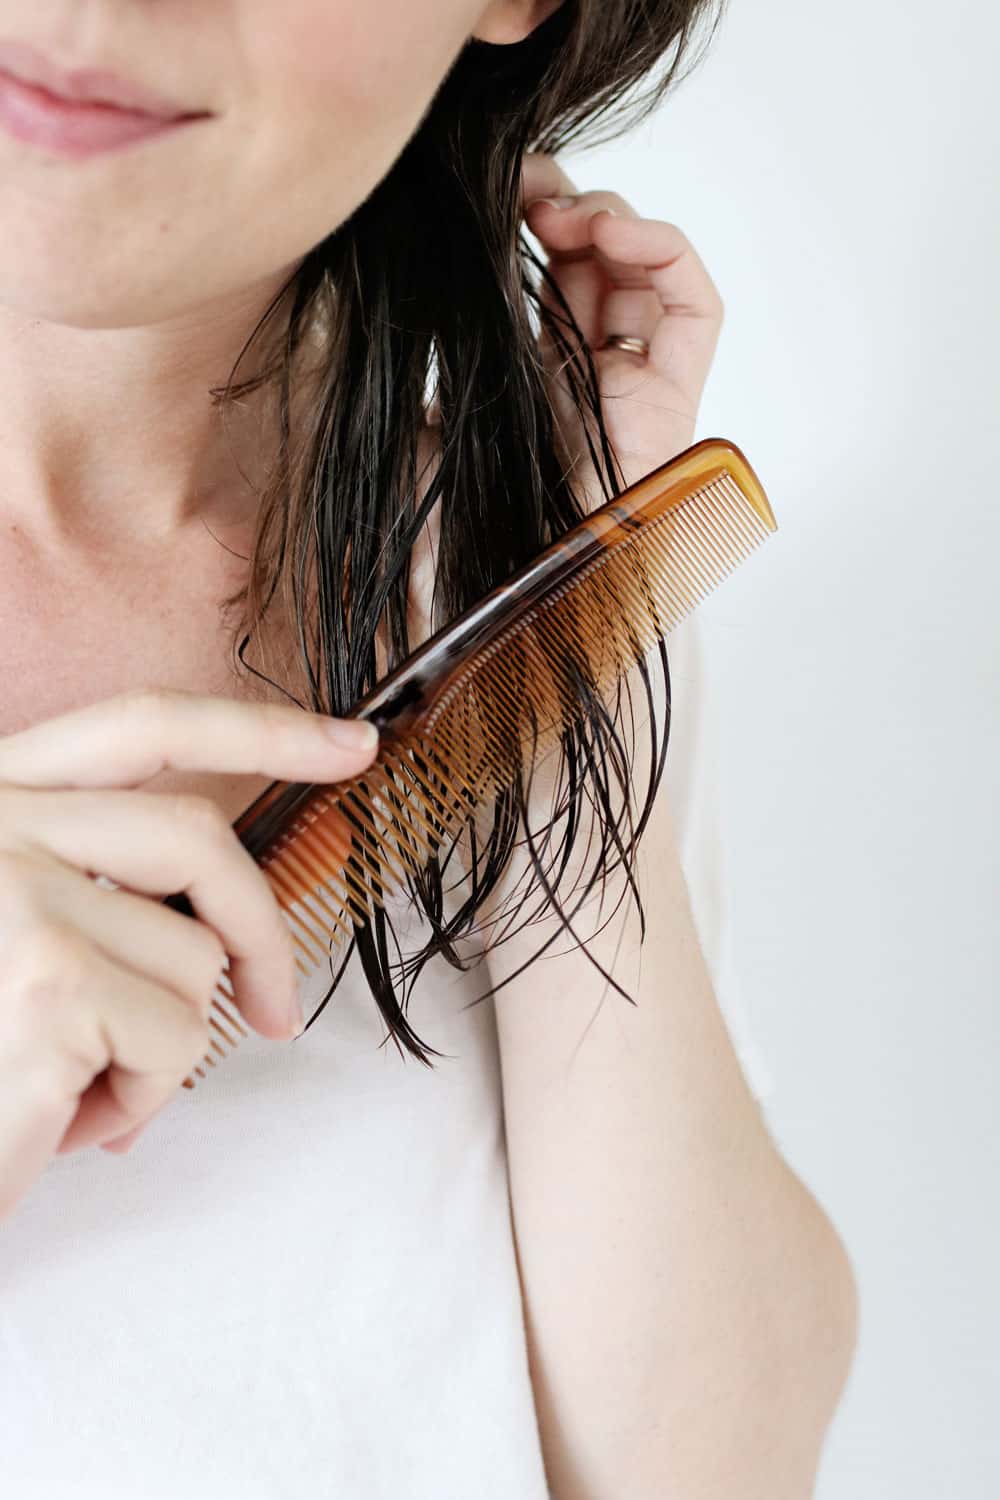 How to clean hairbrushes and combs